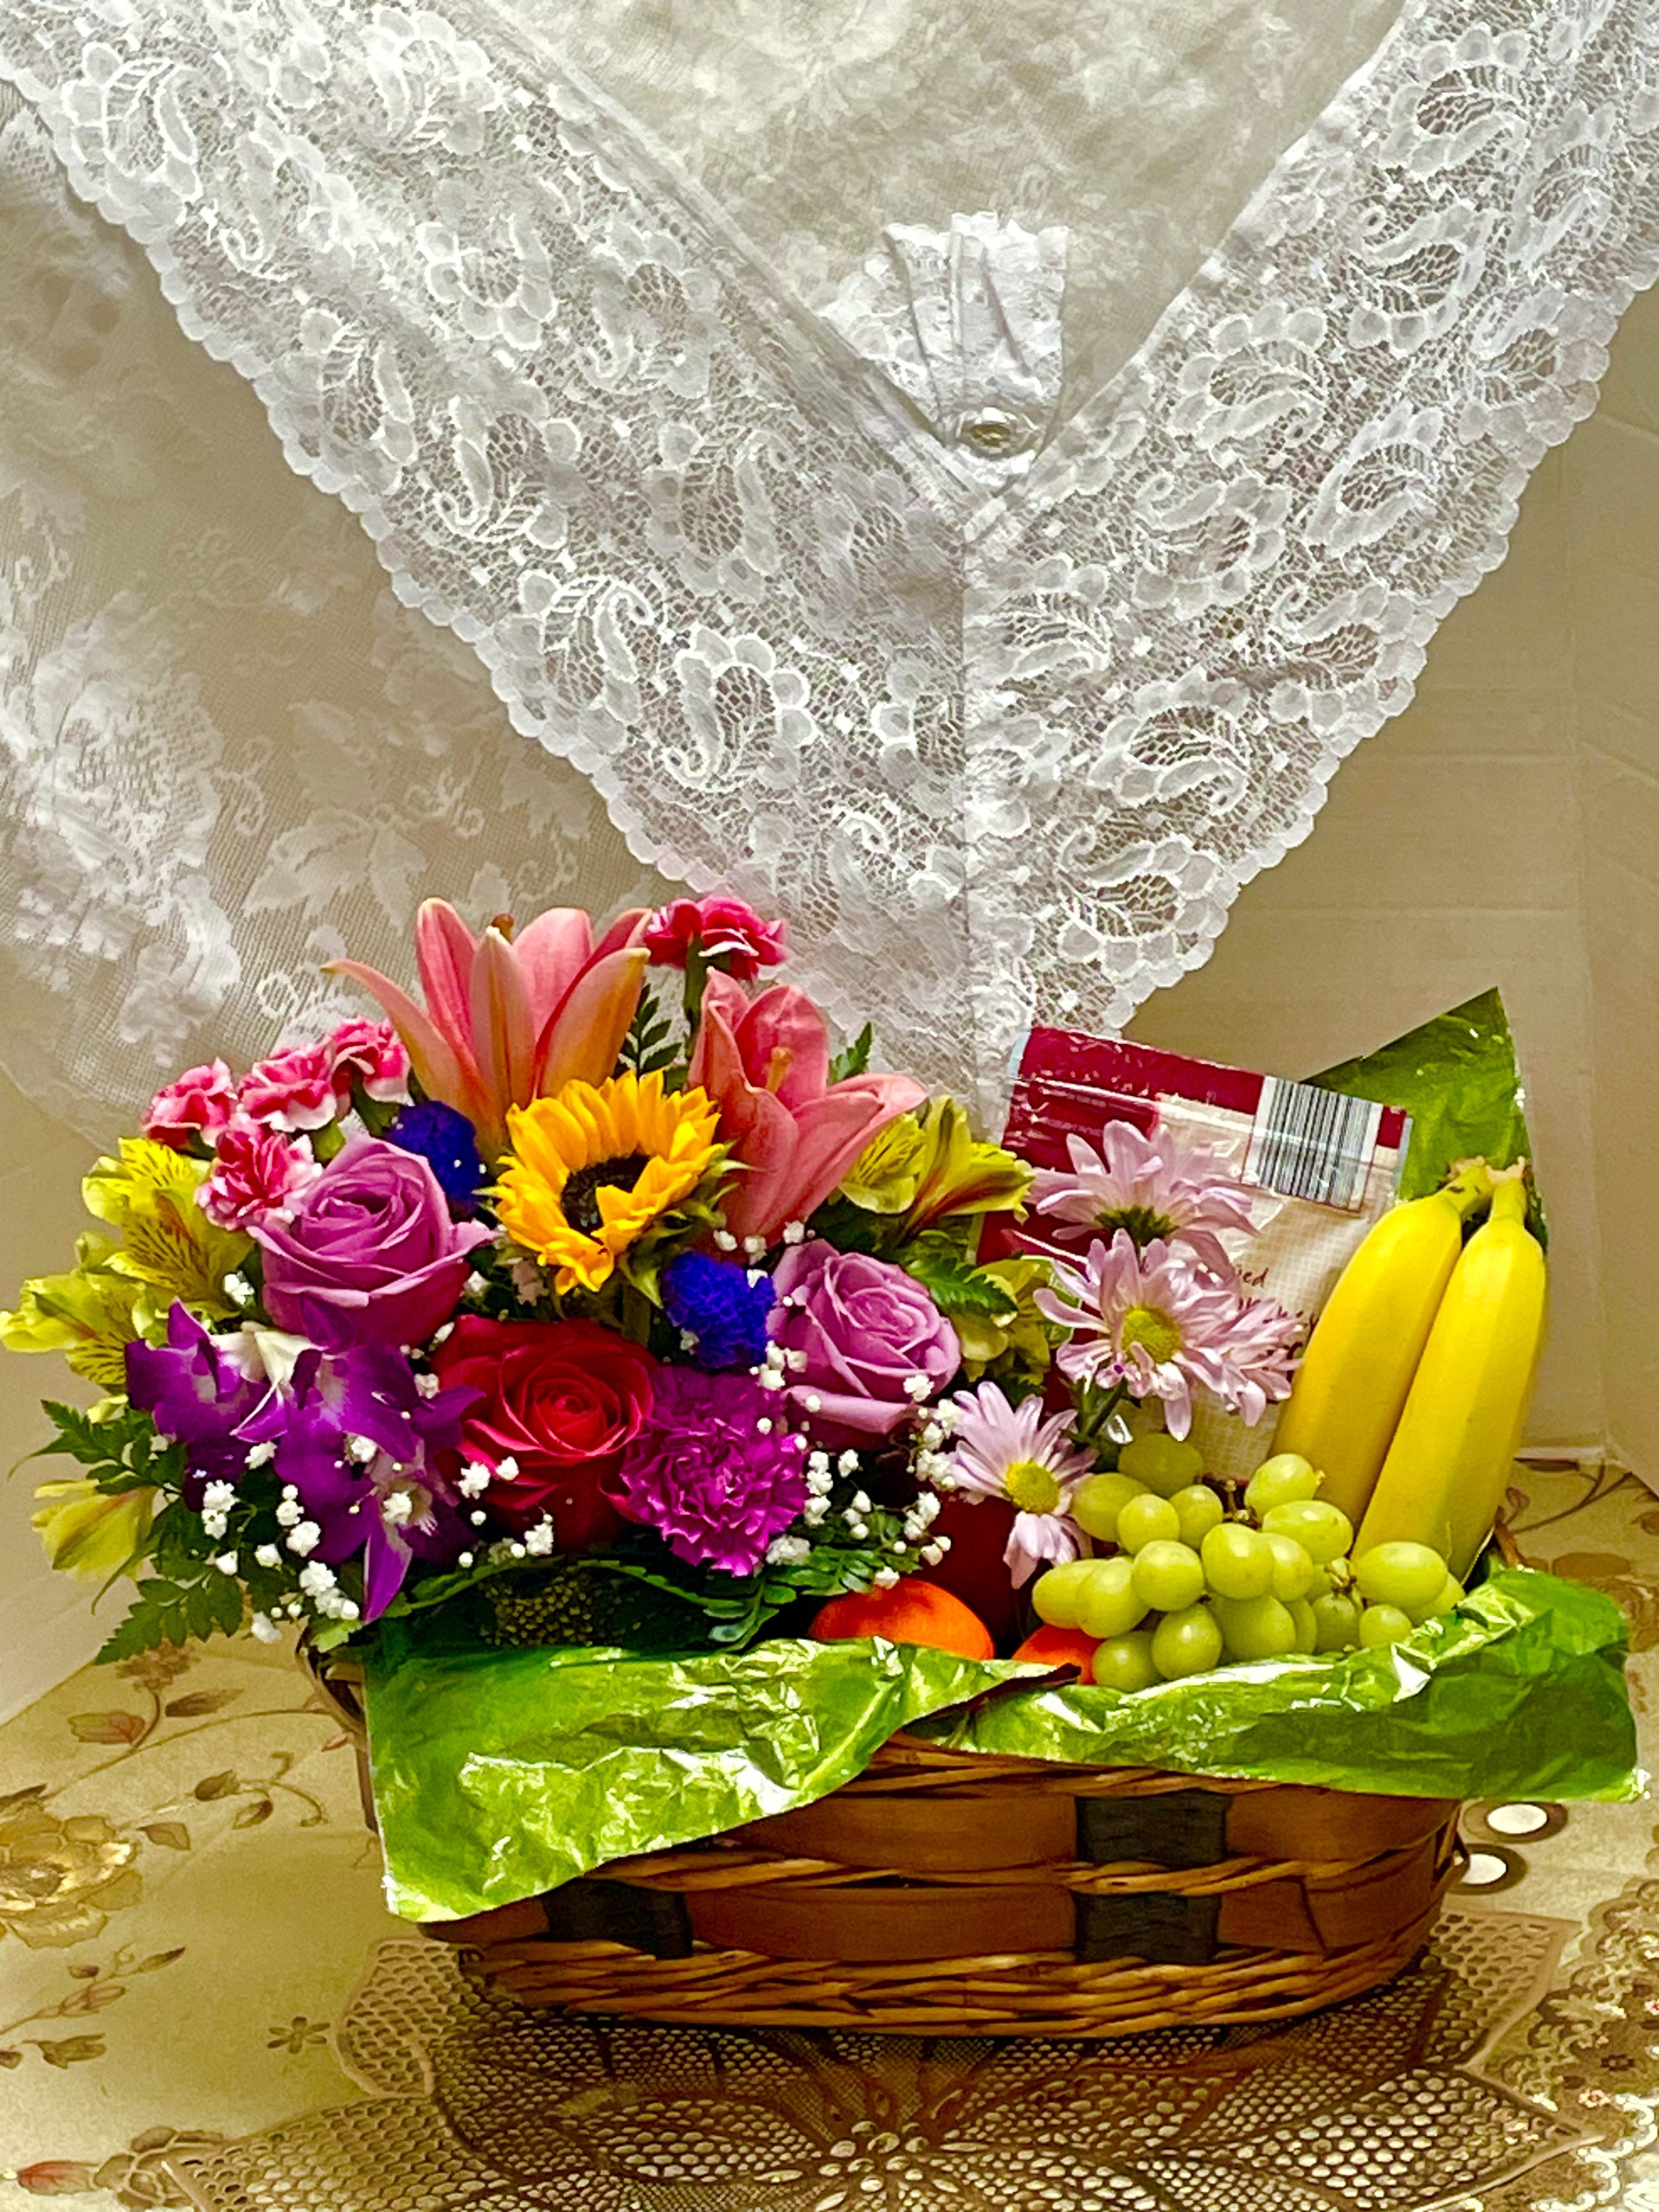 Gift Baskets - A ROYAL BLOOM FLOWERS & GIFTS - Lauderhill, FL